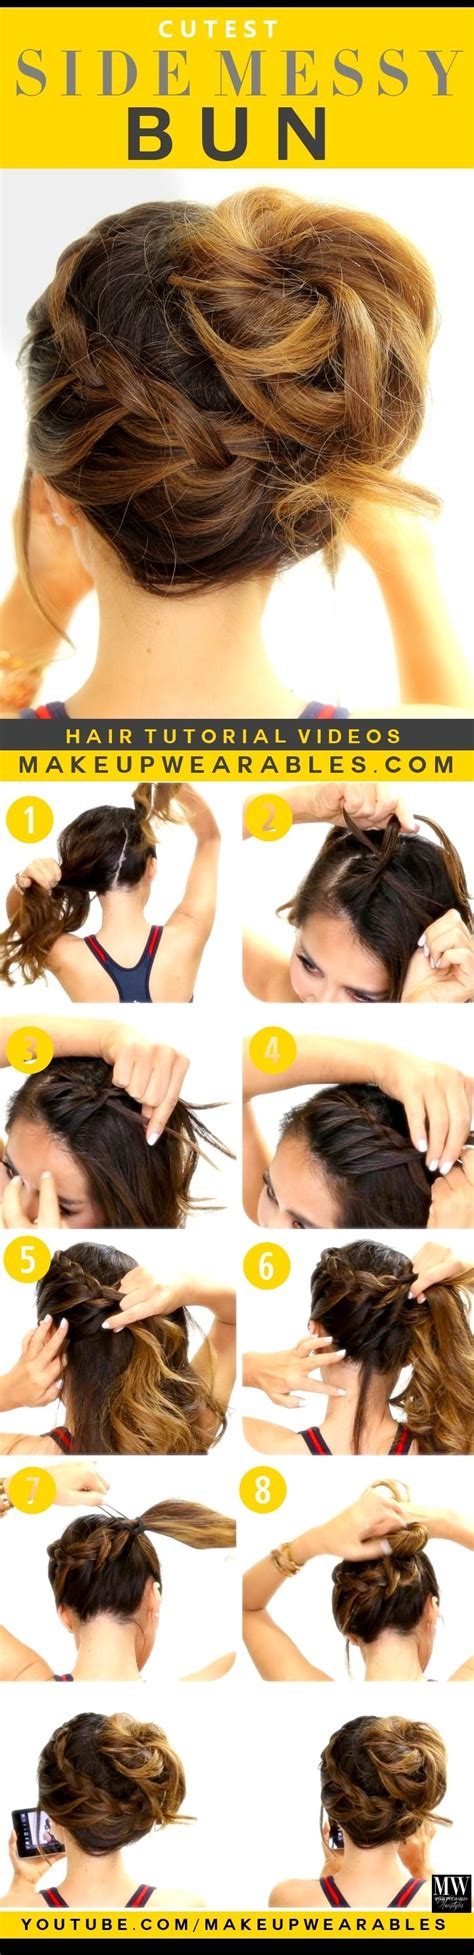 Diy Side Messy Bun Pictures Photos And Images For